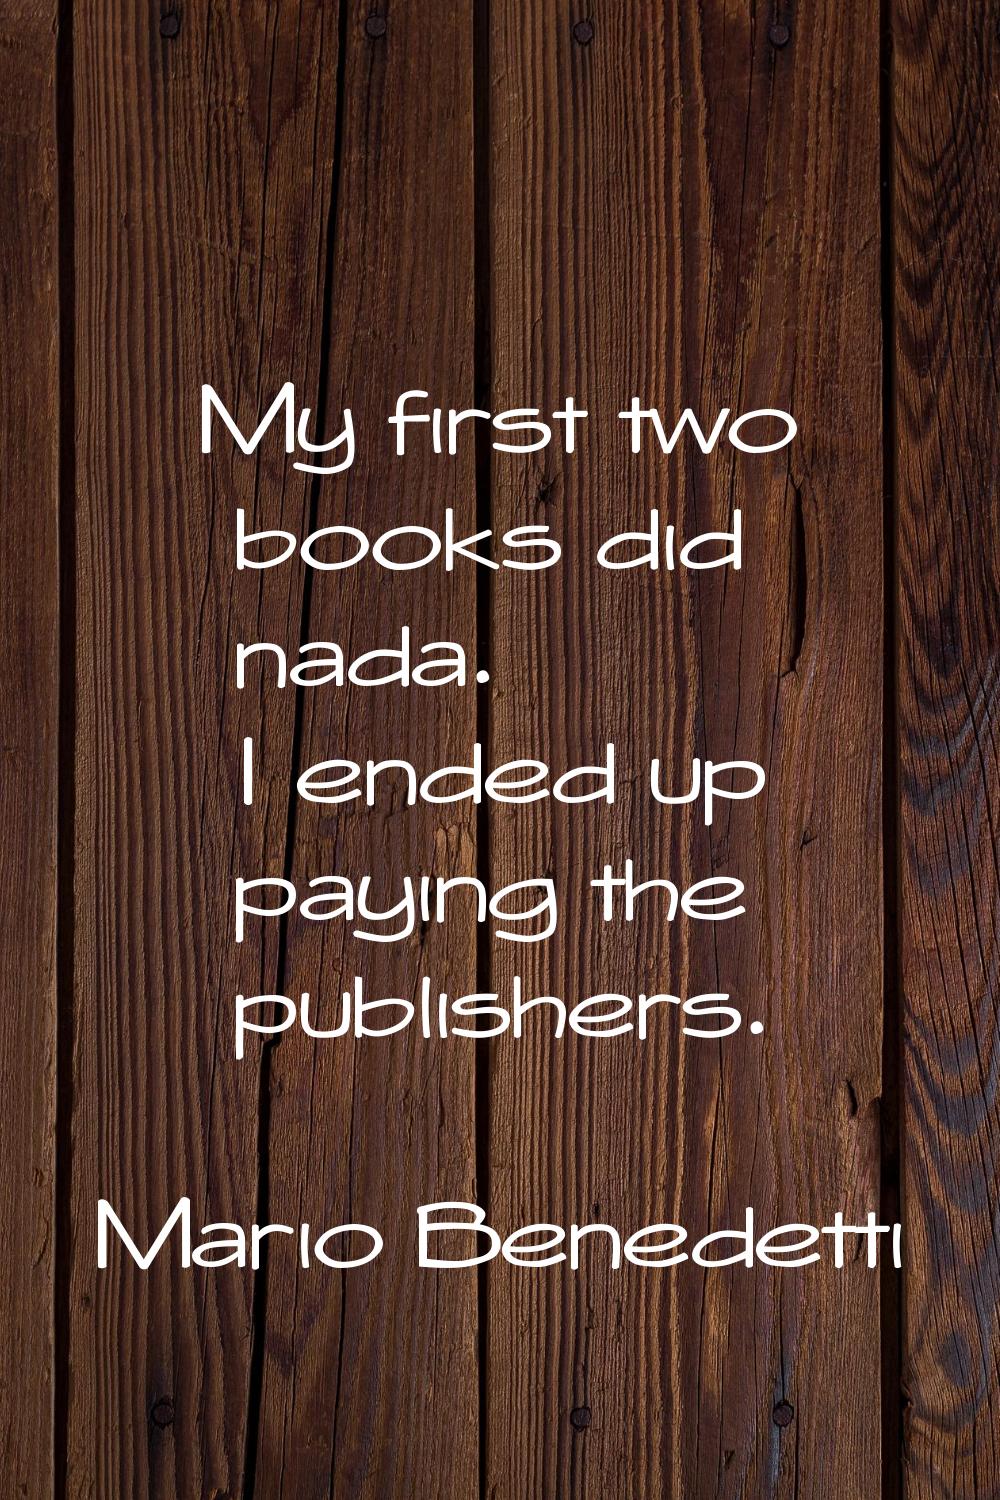 My first two books did nada. I ended up paying the publishers.